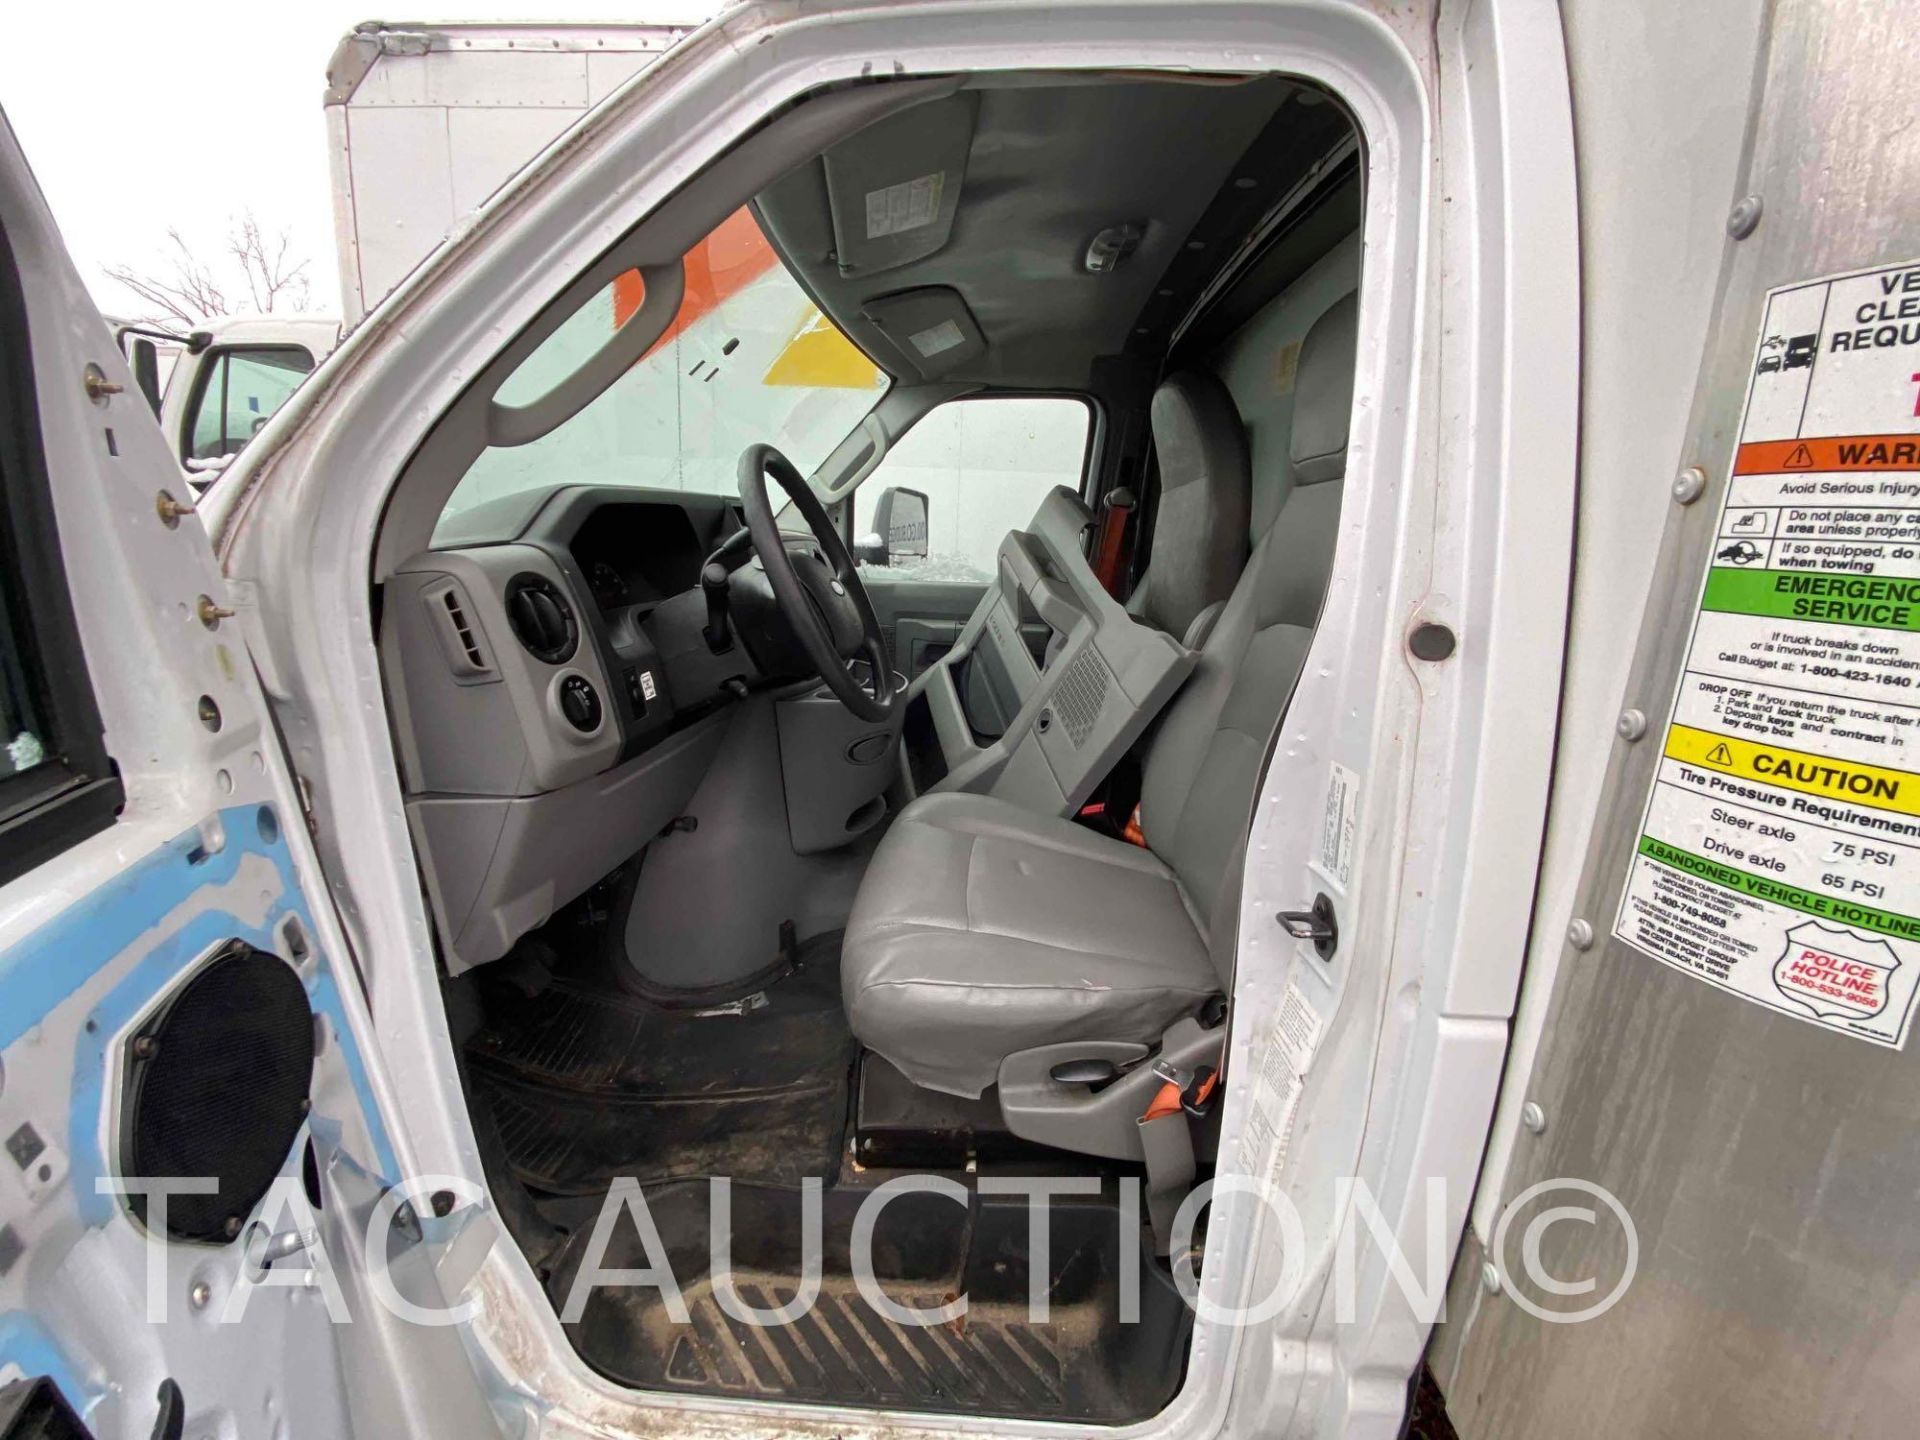 2016 Ford E-350 Box Truck - Image 23 of 48